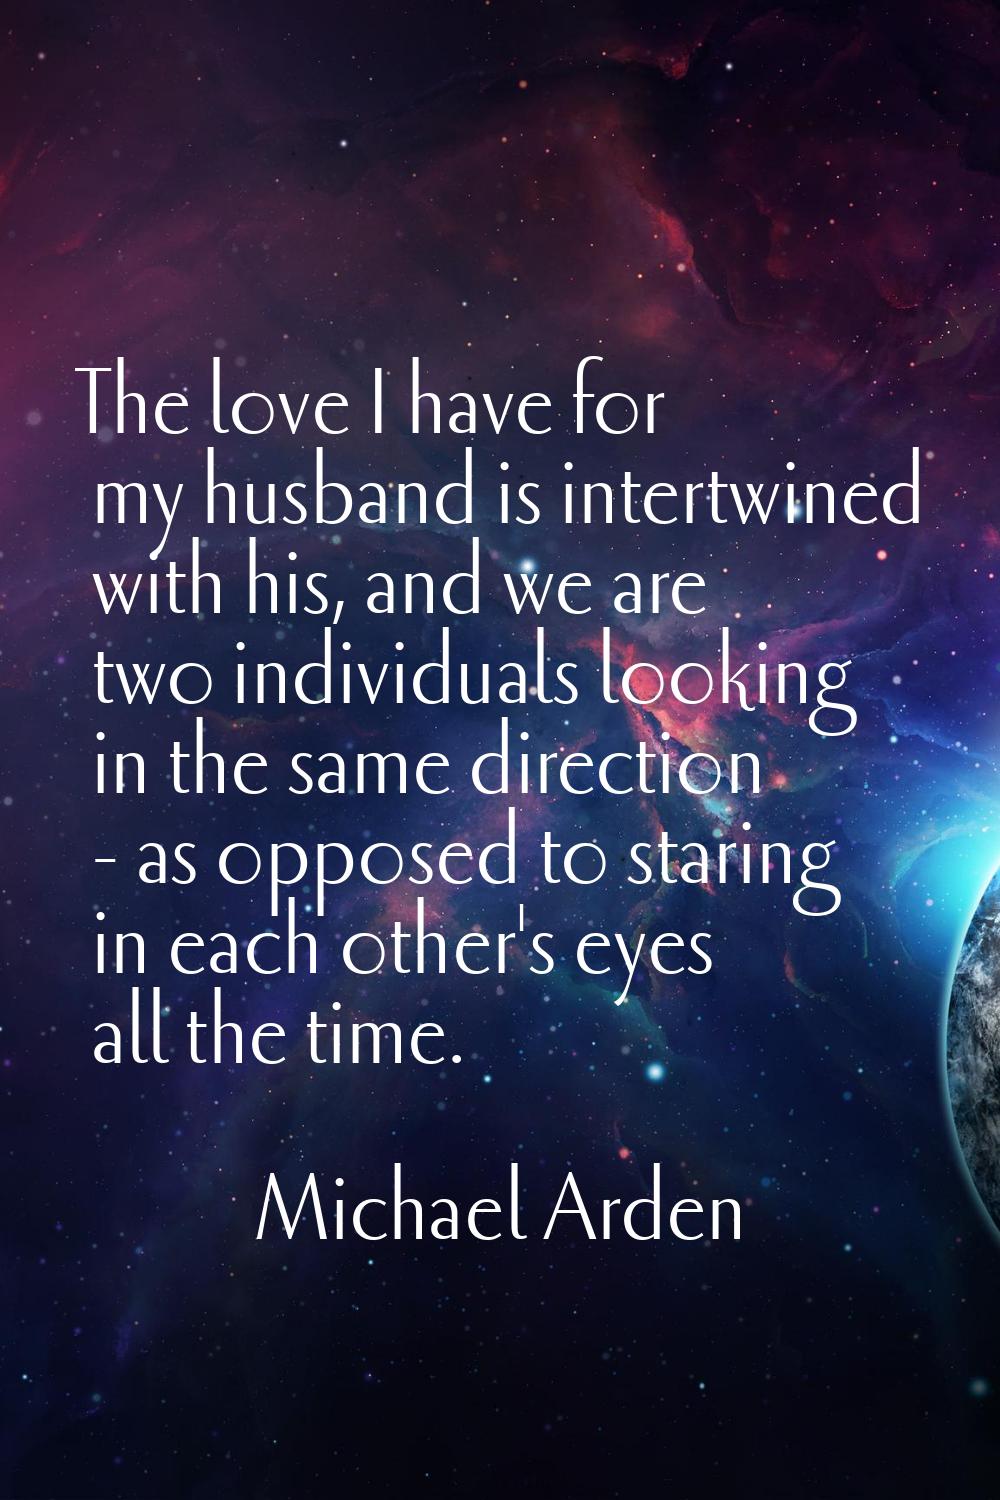 The love I have for my husband is intertwined with his, and we are two individuals looking in the s